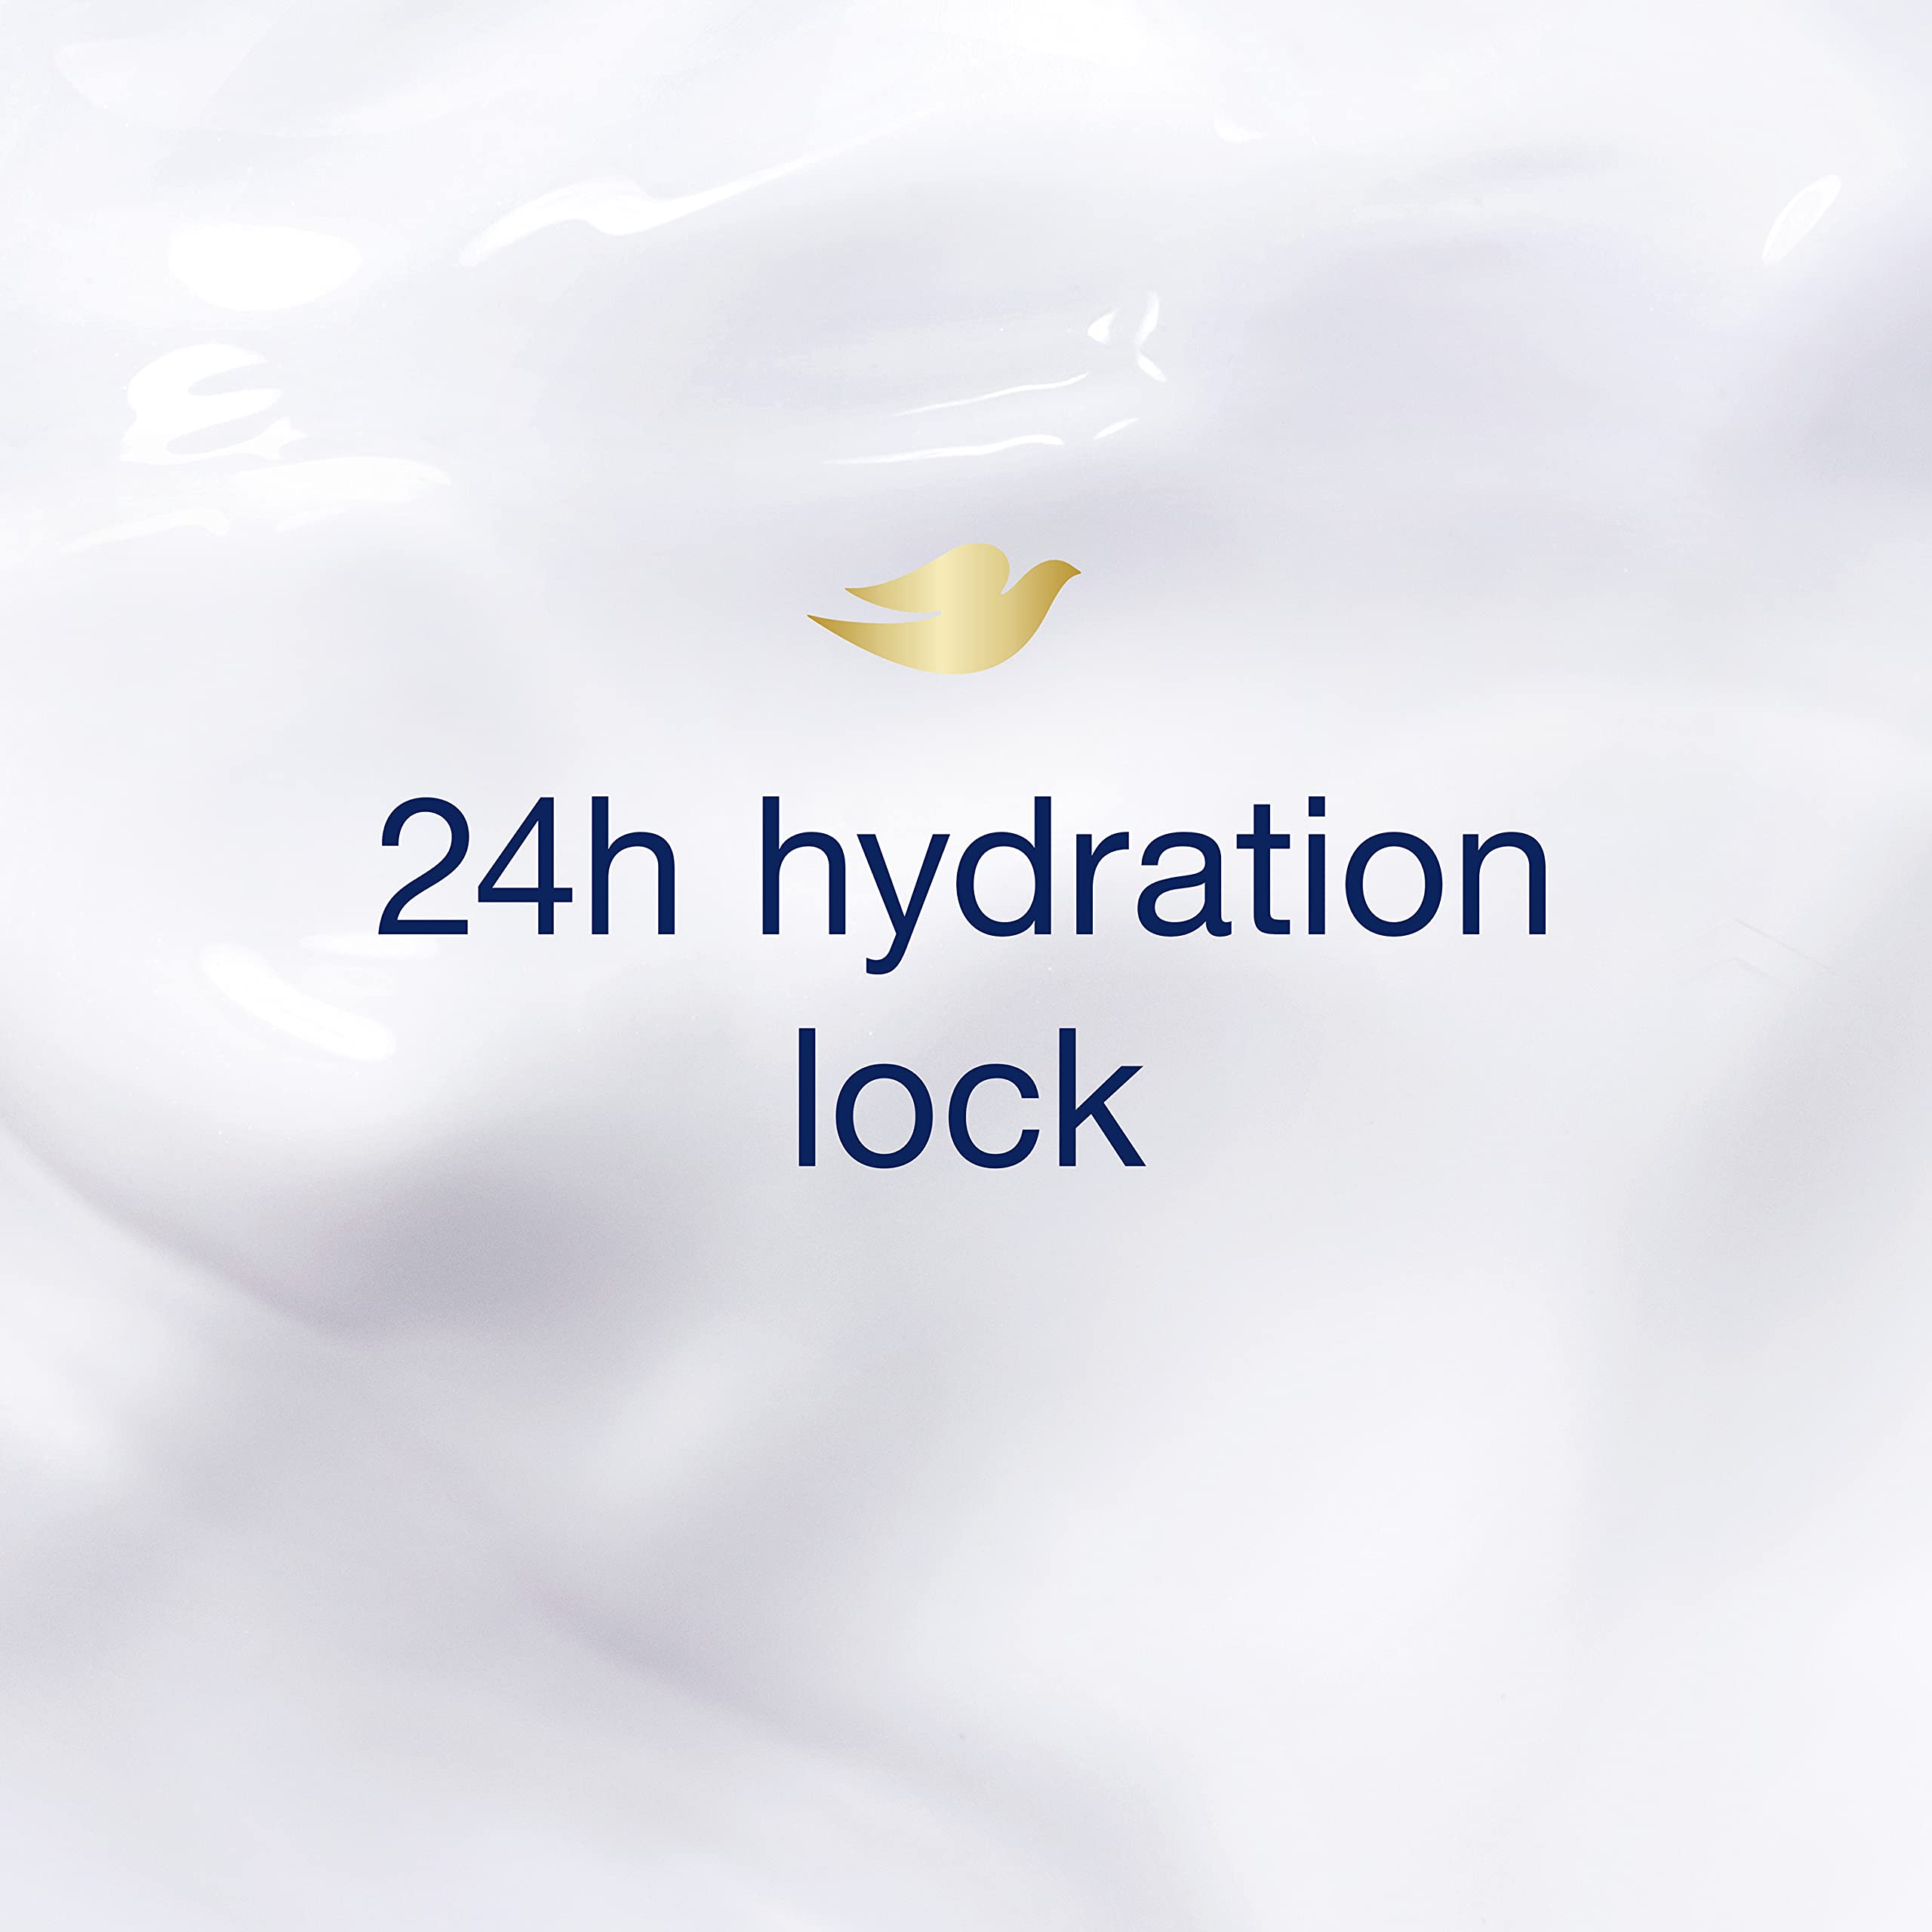 Dove Conditioner Hydration Spa for Dry Hair Hair Conditioner with Hyaluronic Serum 33.8 oz